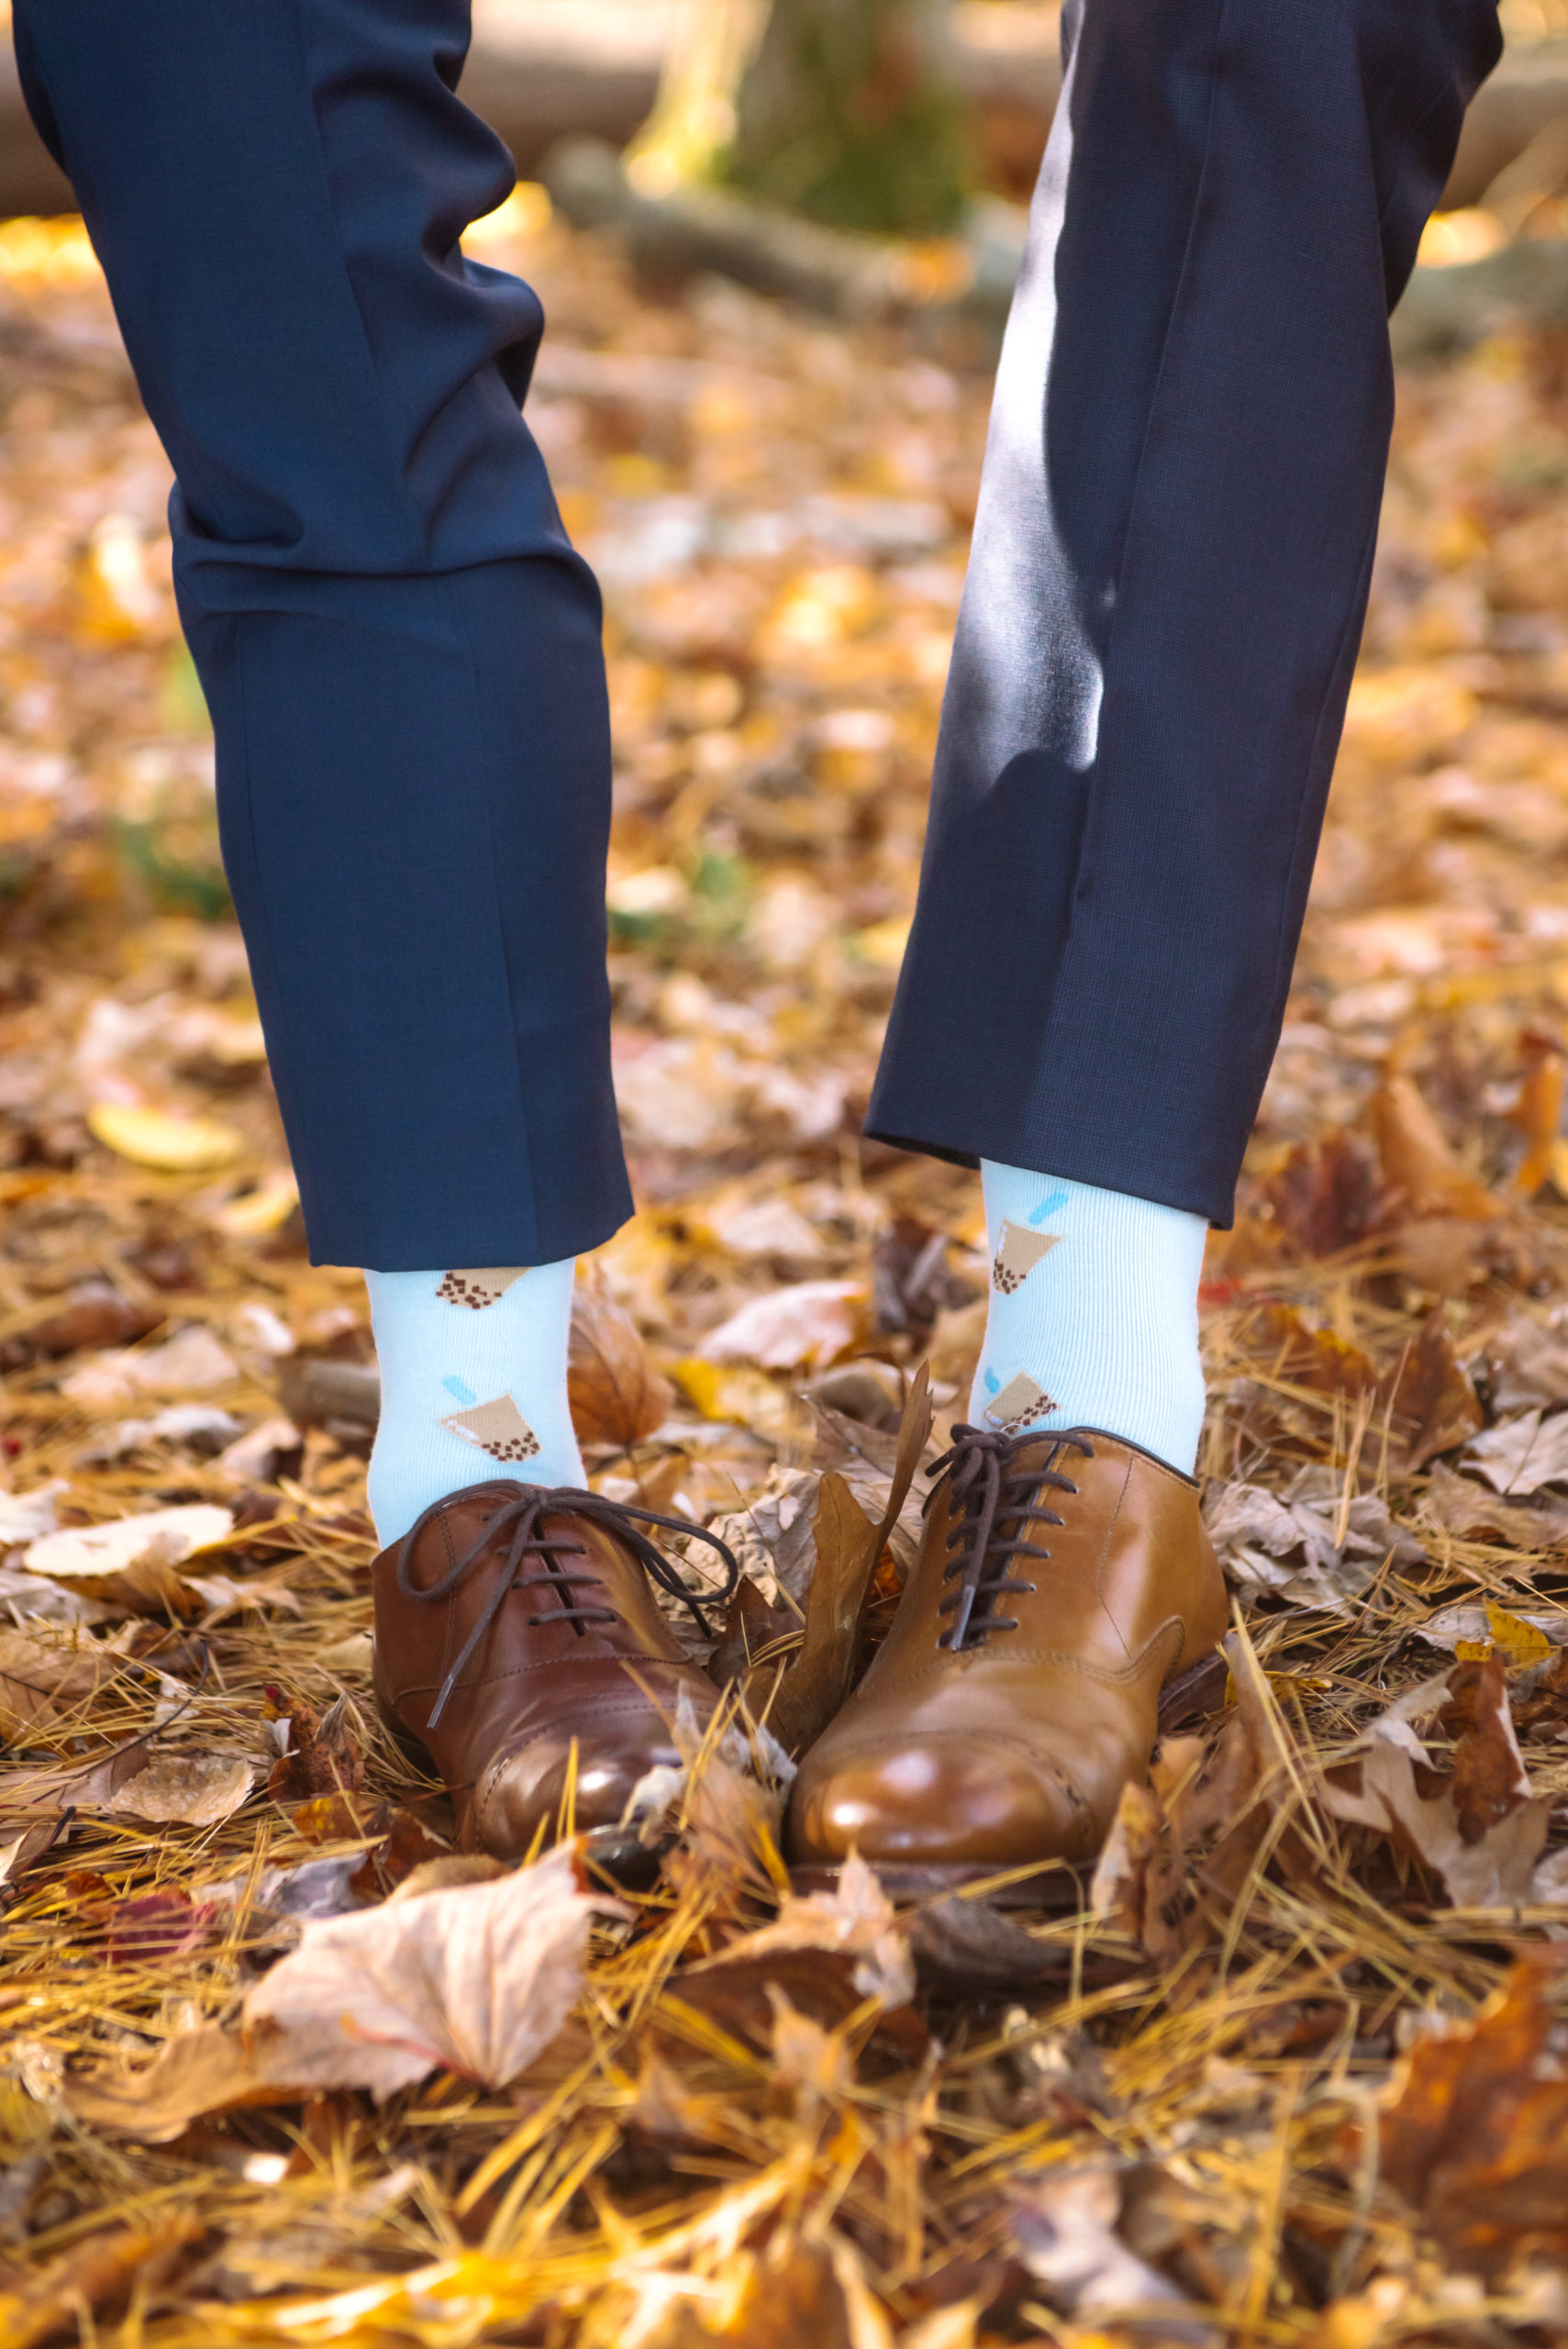 Detail of the groom's wedding shoes and milk tea bubble tea socks. In view is one of each groom's leg. They are standing atop autumnal leaves.